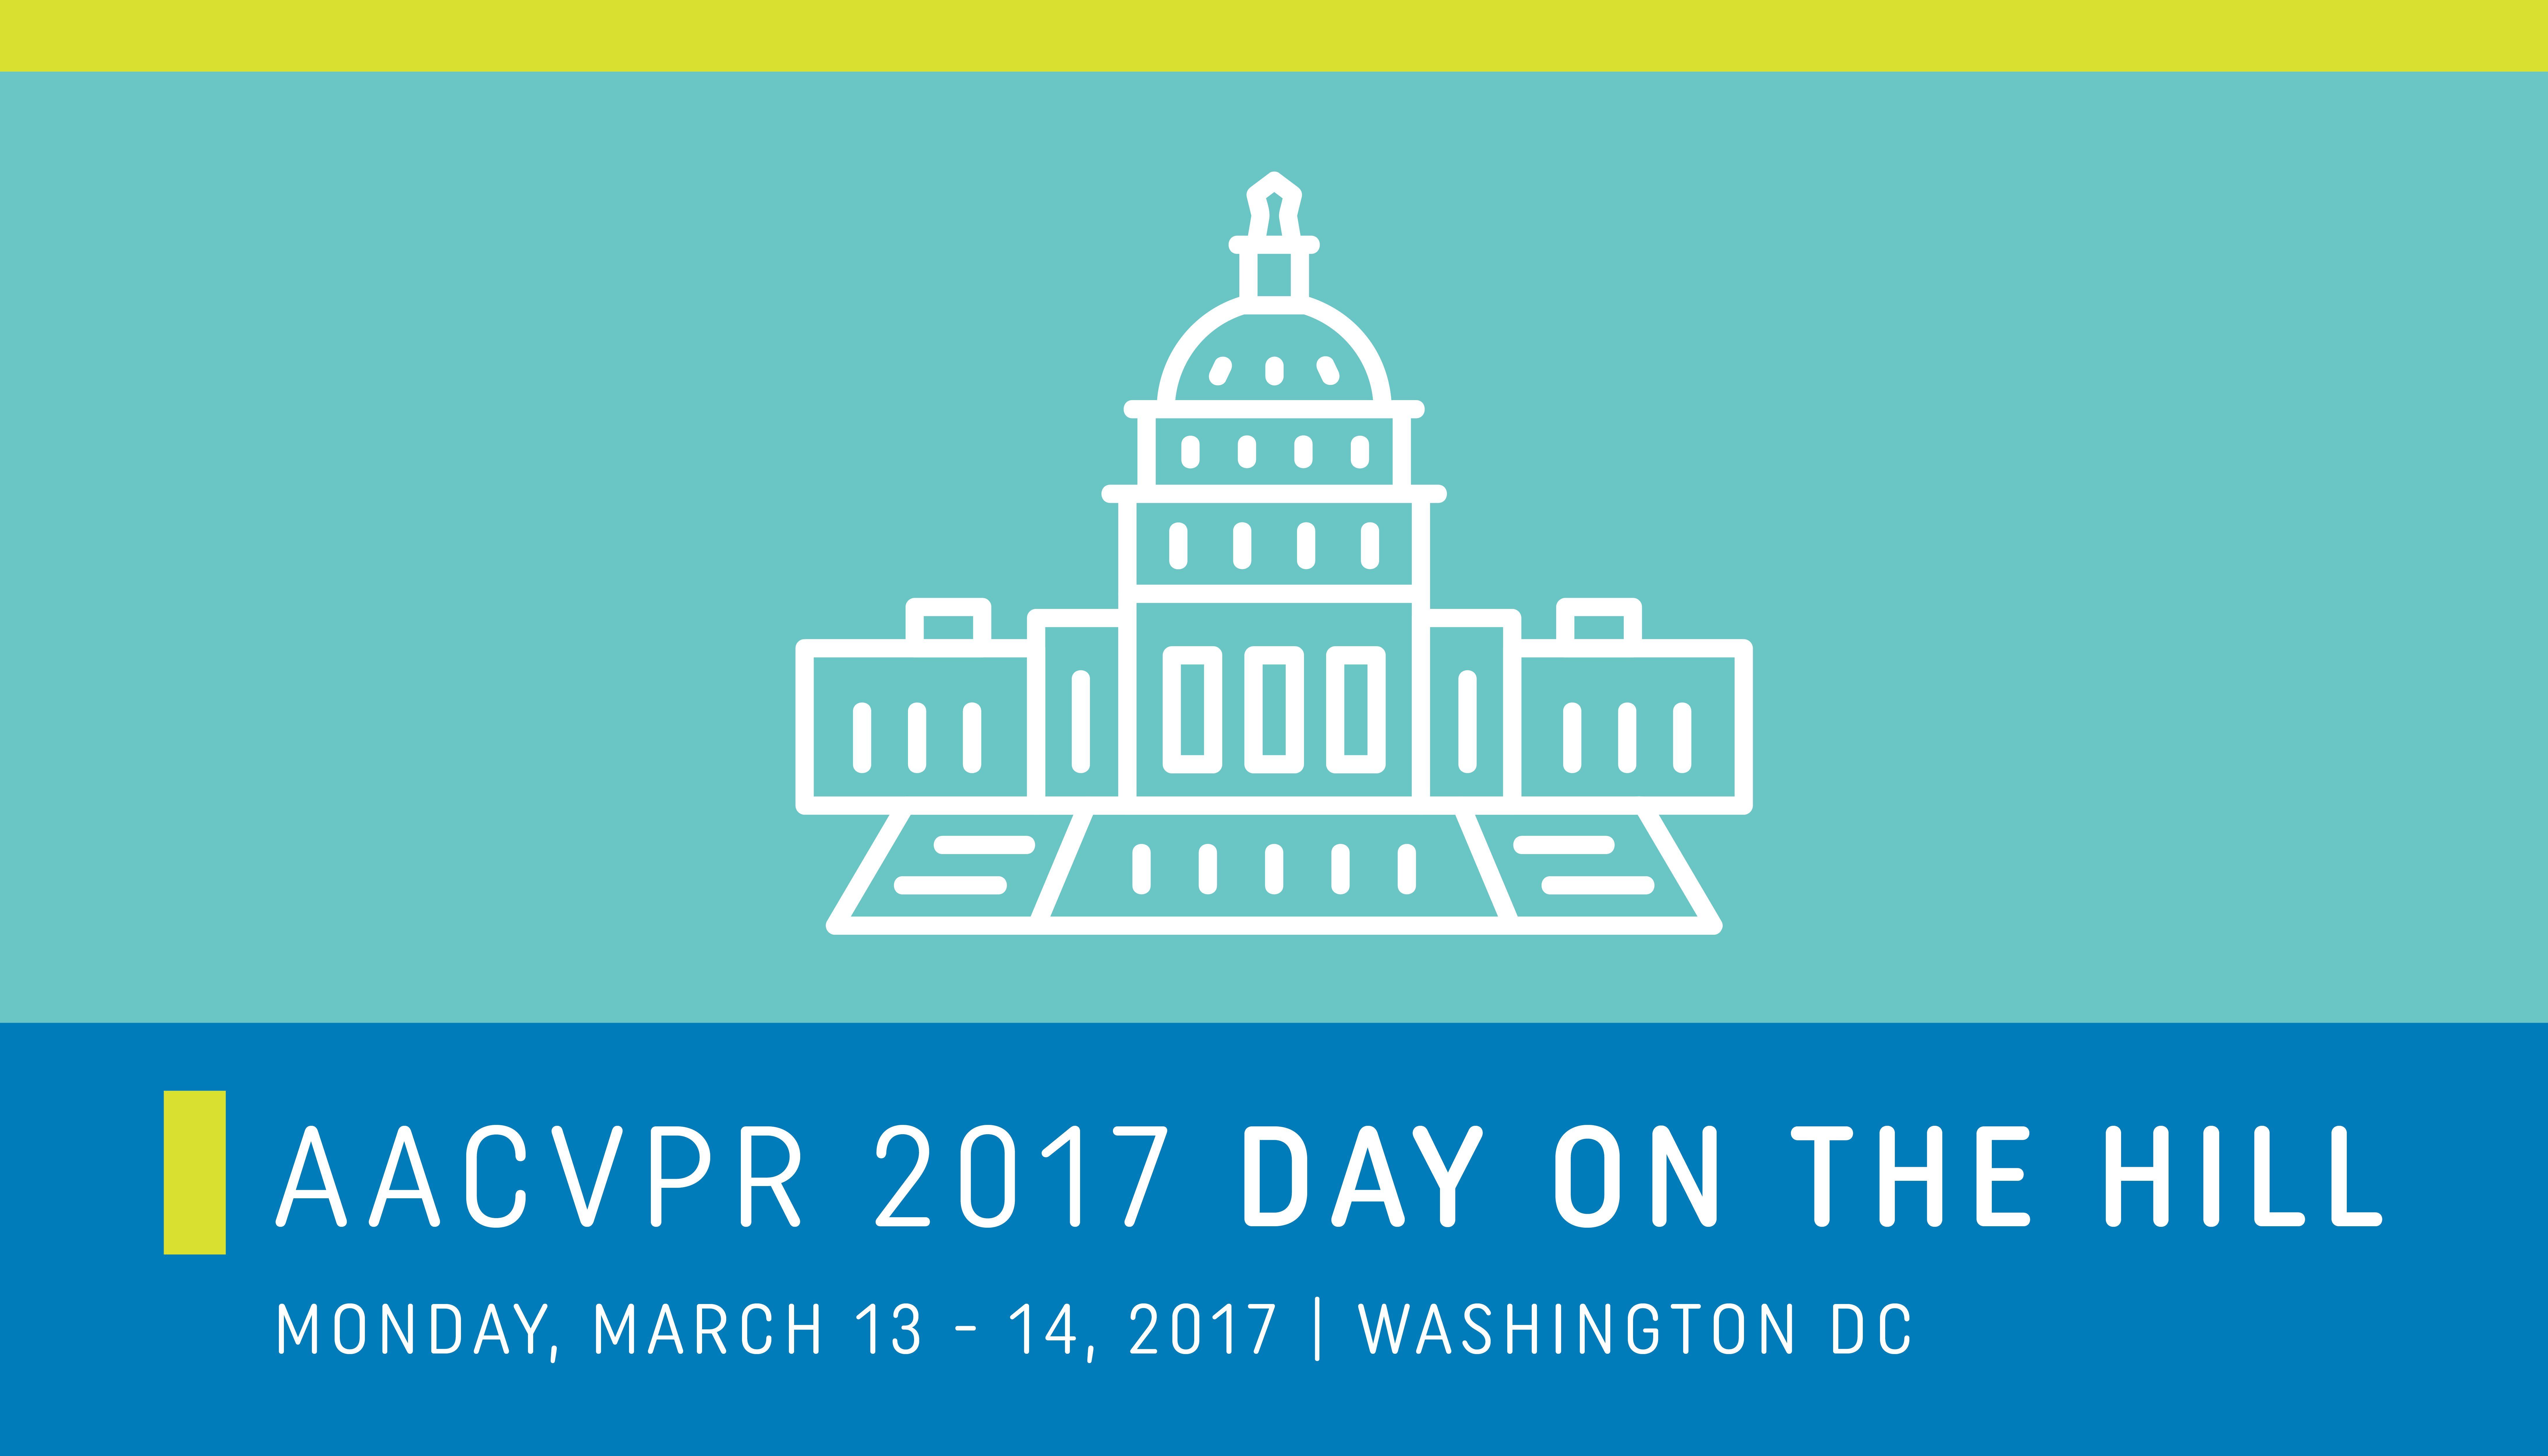 AACVPR Logo - AACVPR Day on the Hill 2017 | LSI | Cardiopulmonary Monitoring Solutions